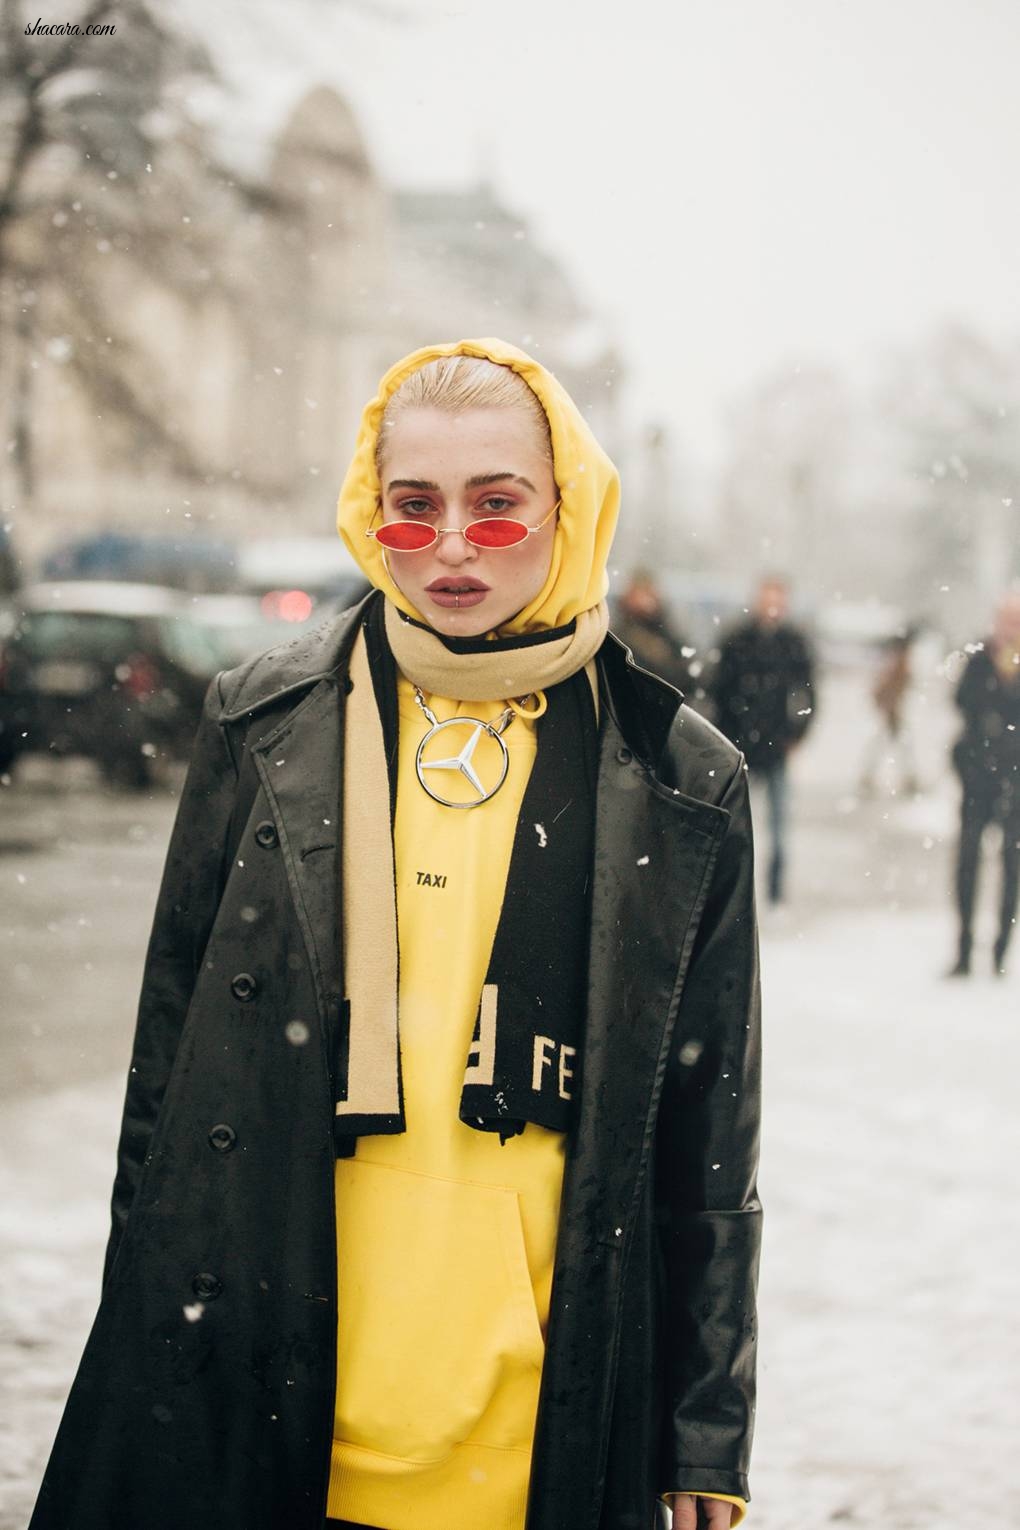 THE BEST STREET STYLE FROM COUTURE FASHION WEEK PART 3